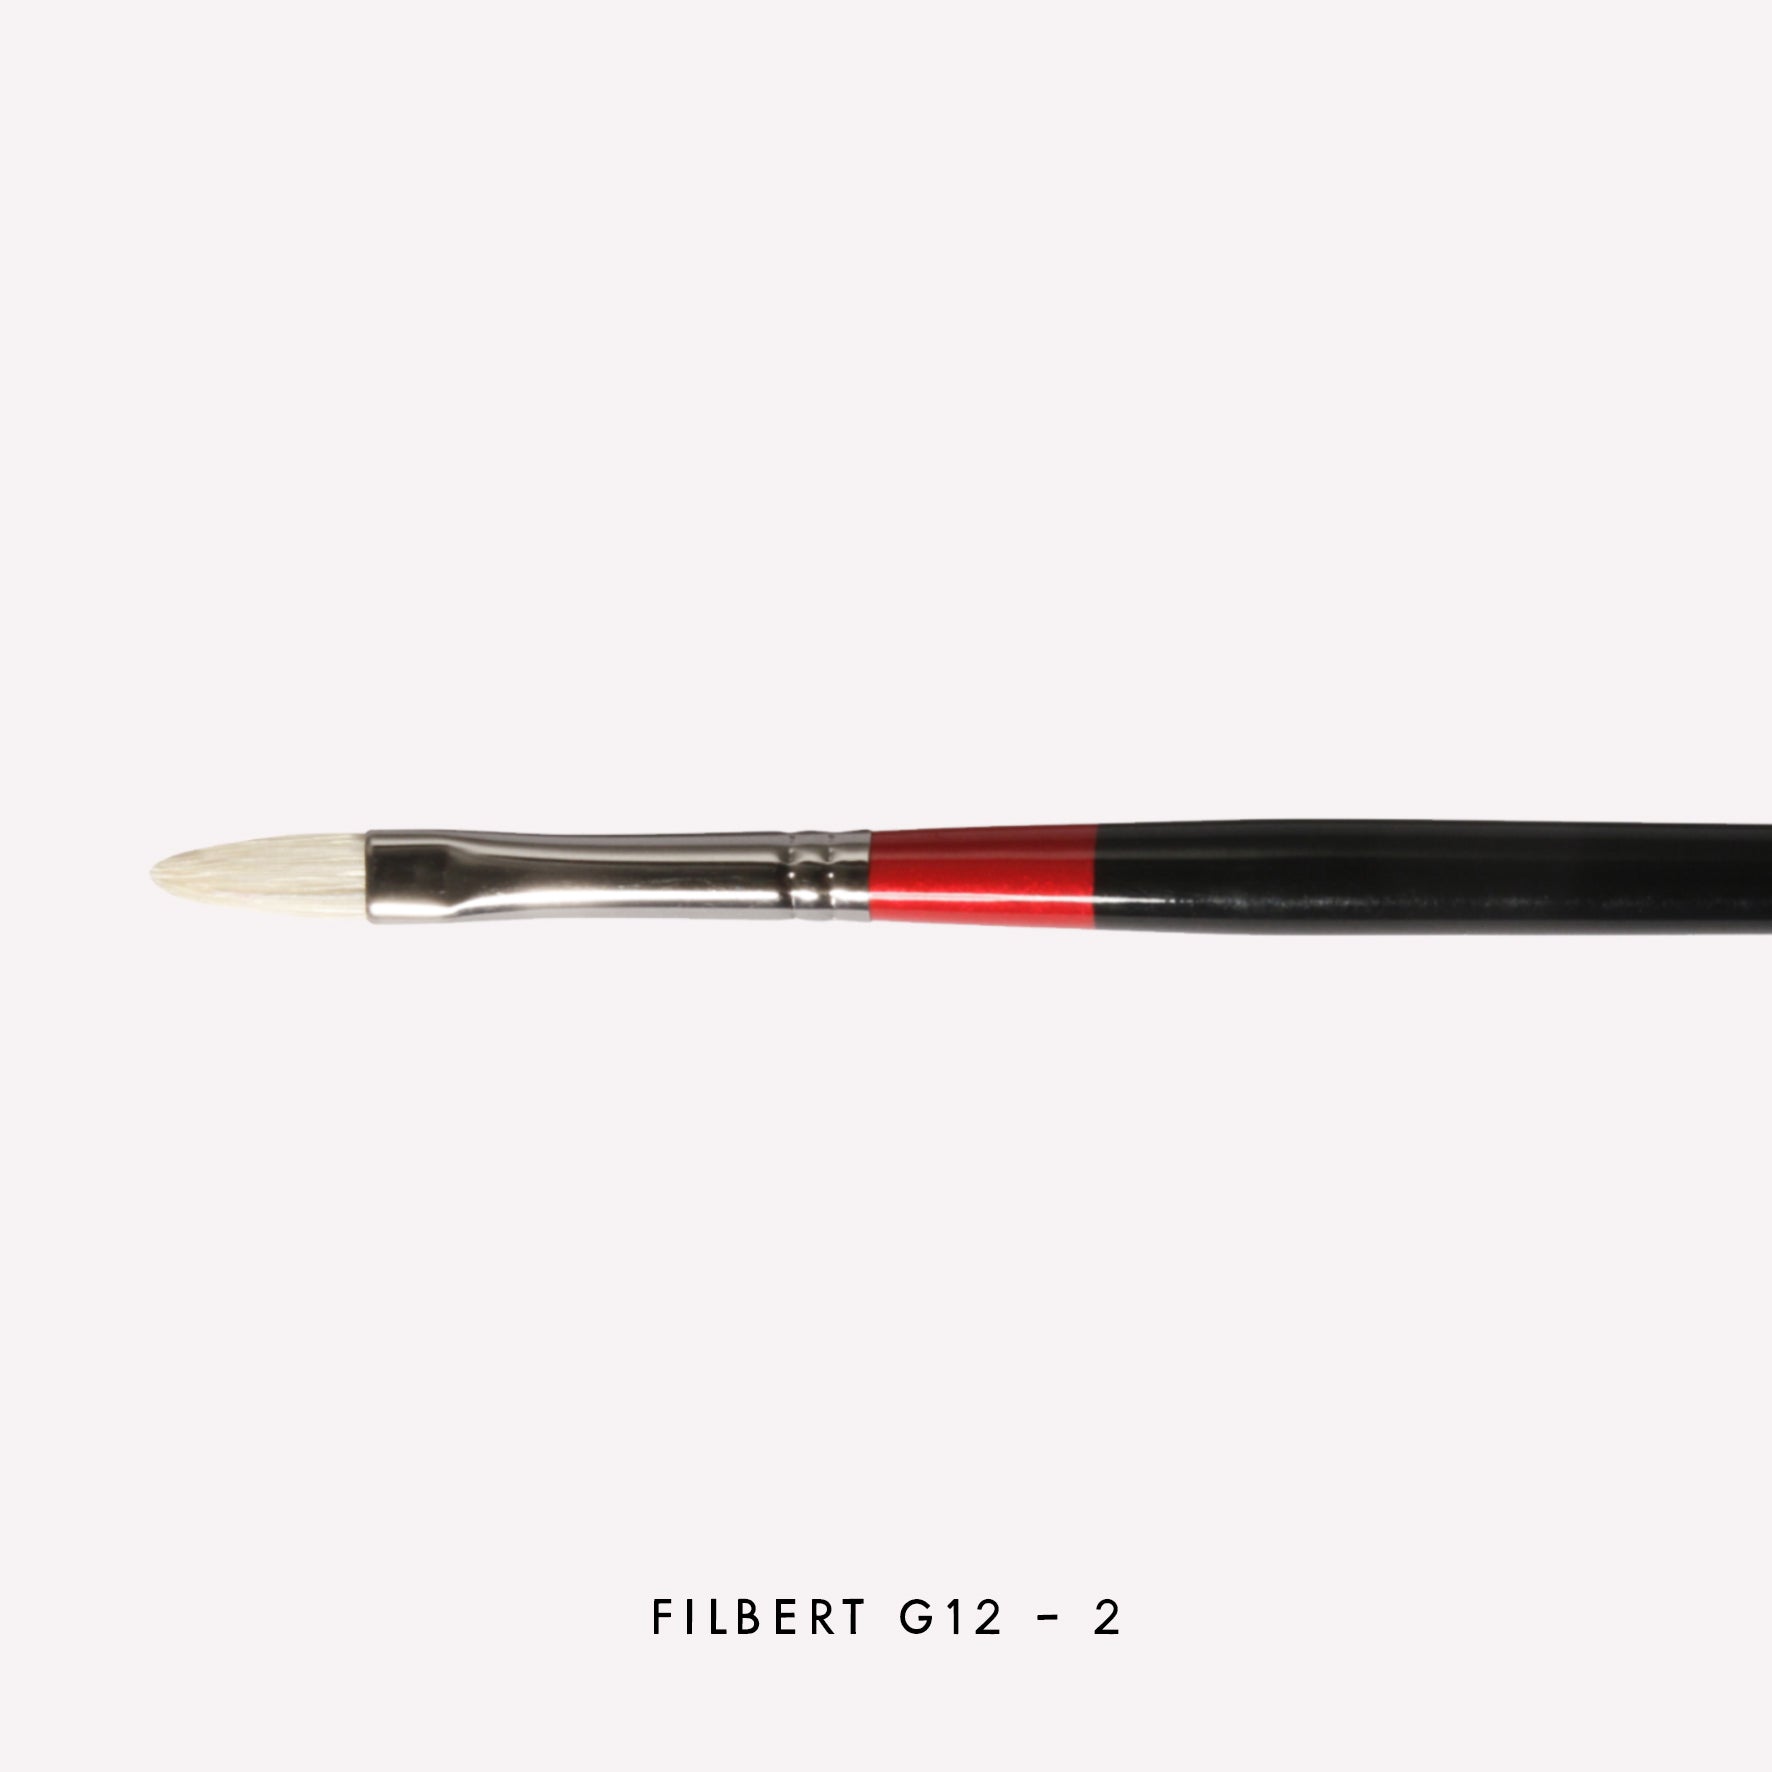 Daler-Rowney Georgian Filbert paintbrush in size G12-2 . Brushes have a classy black handle with red detailing and a silver ferrule. 